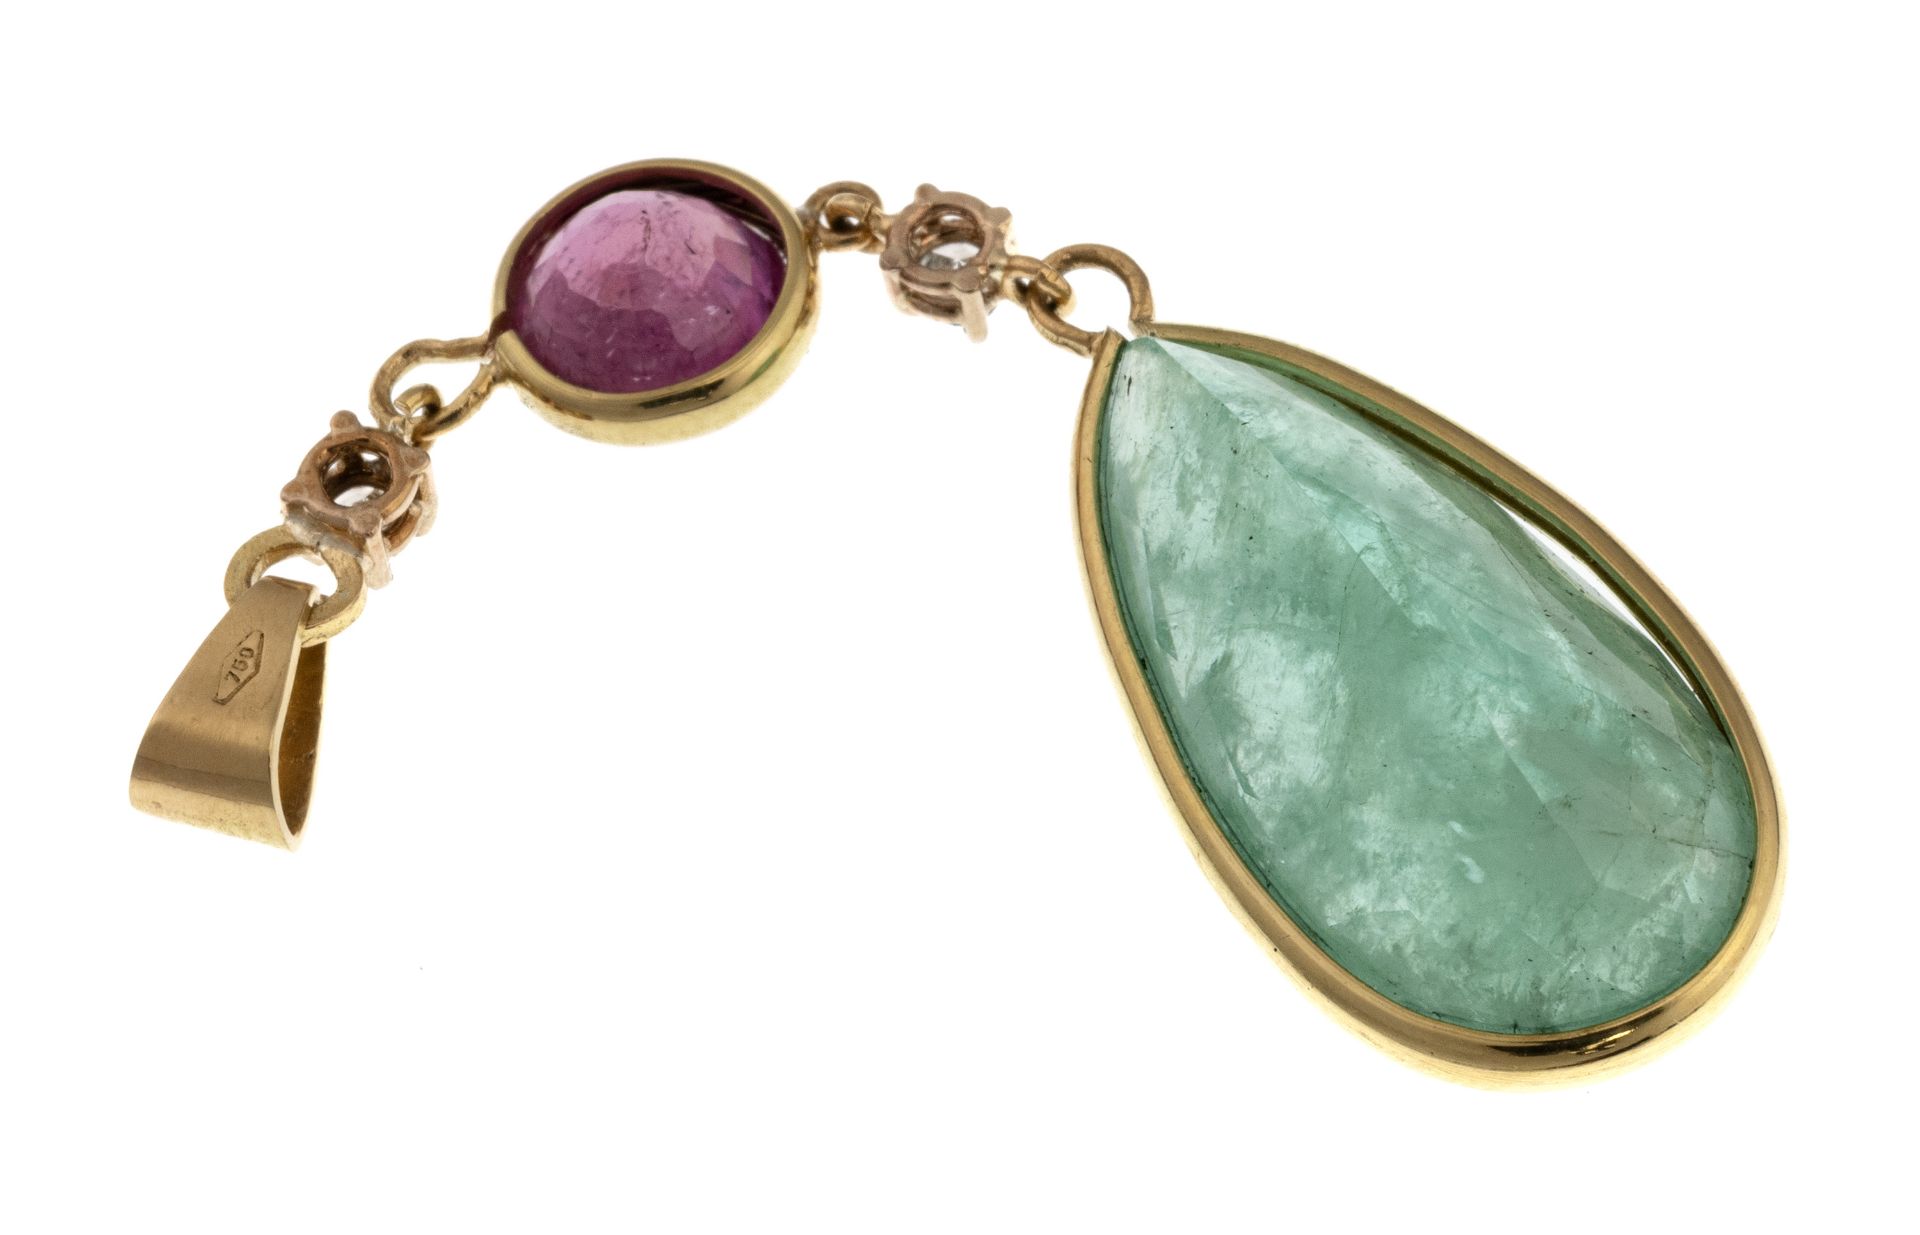 GOLD PENDANT WITH EMERALD